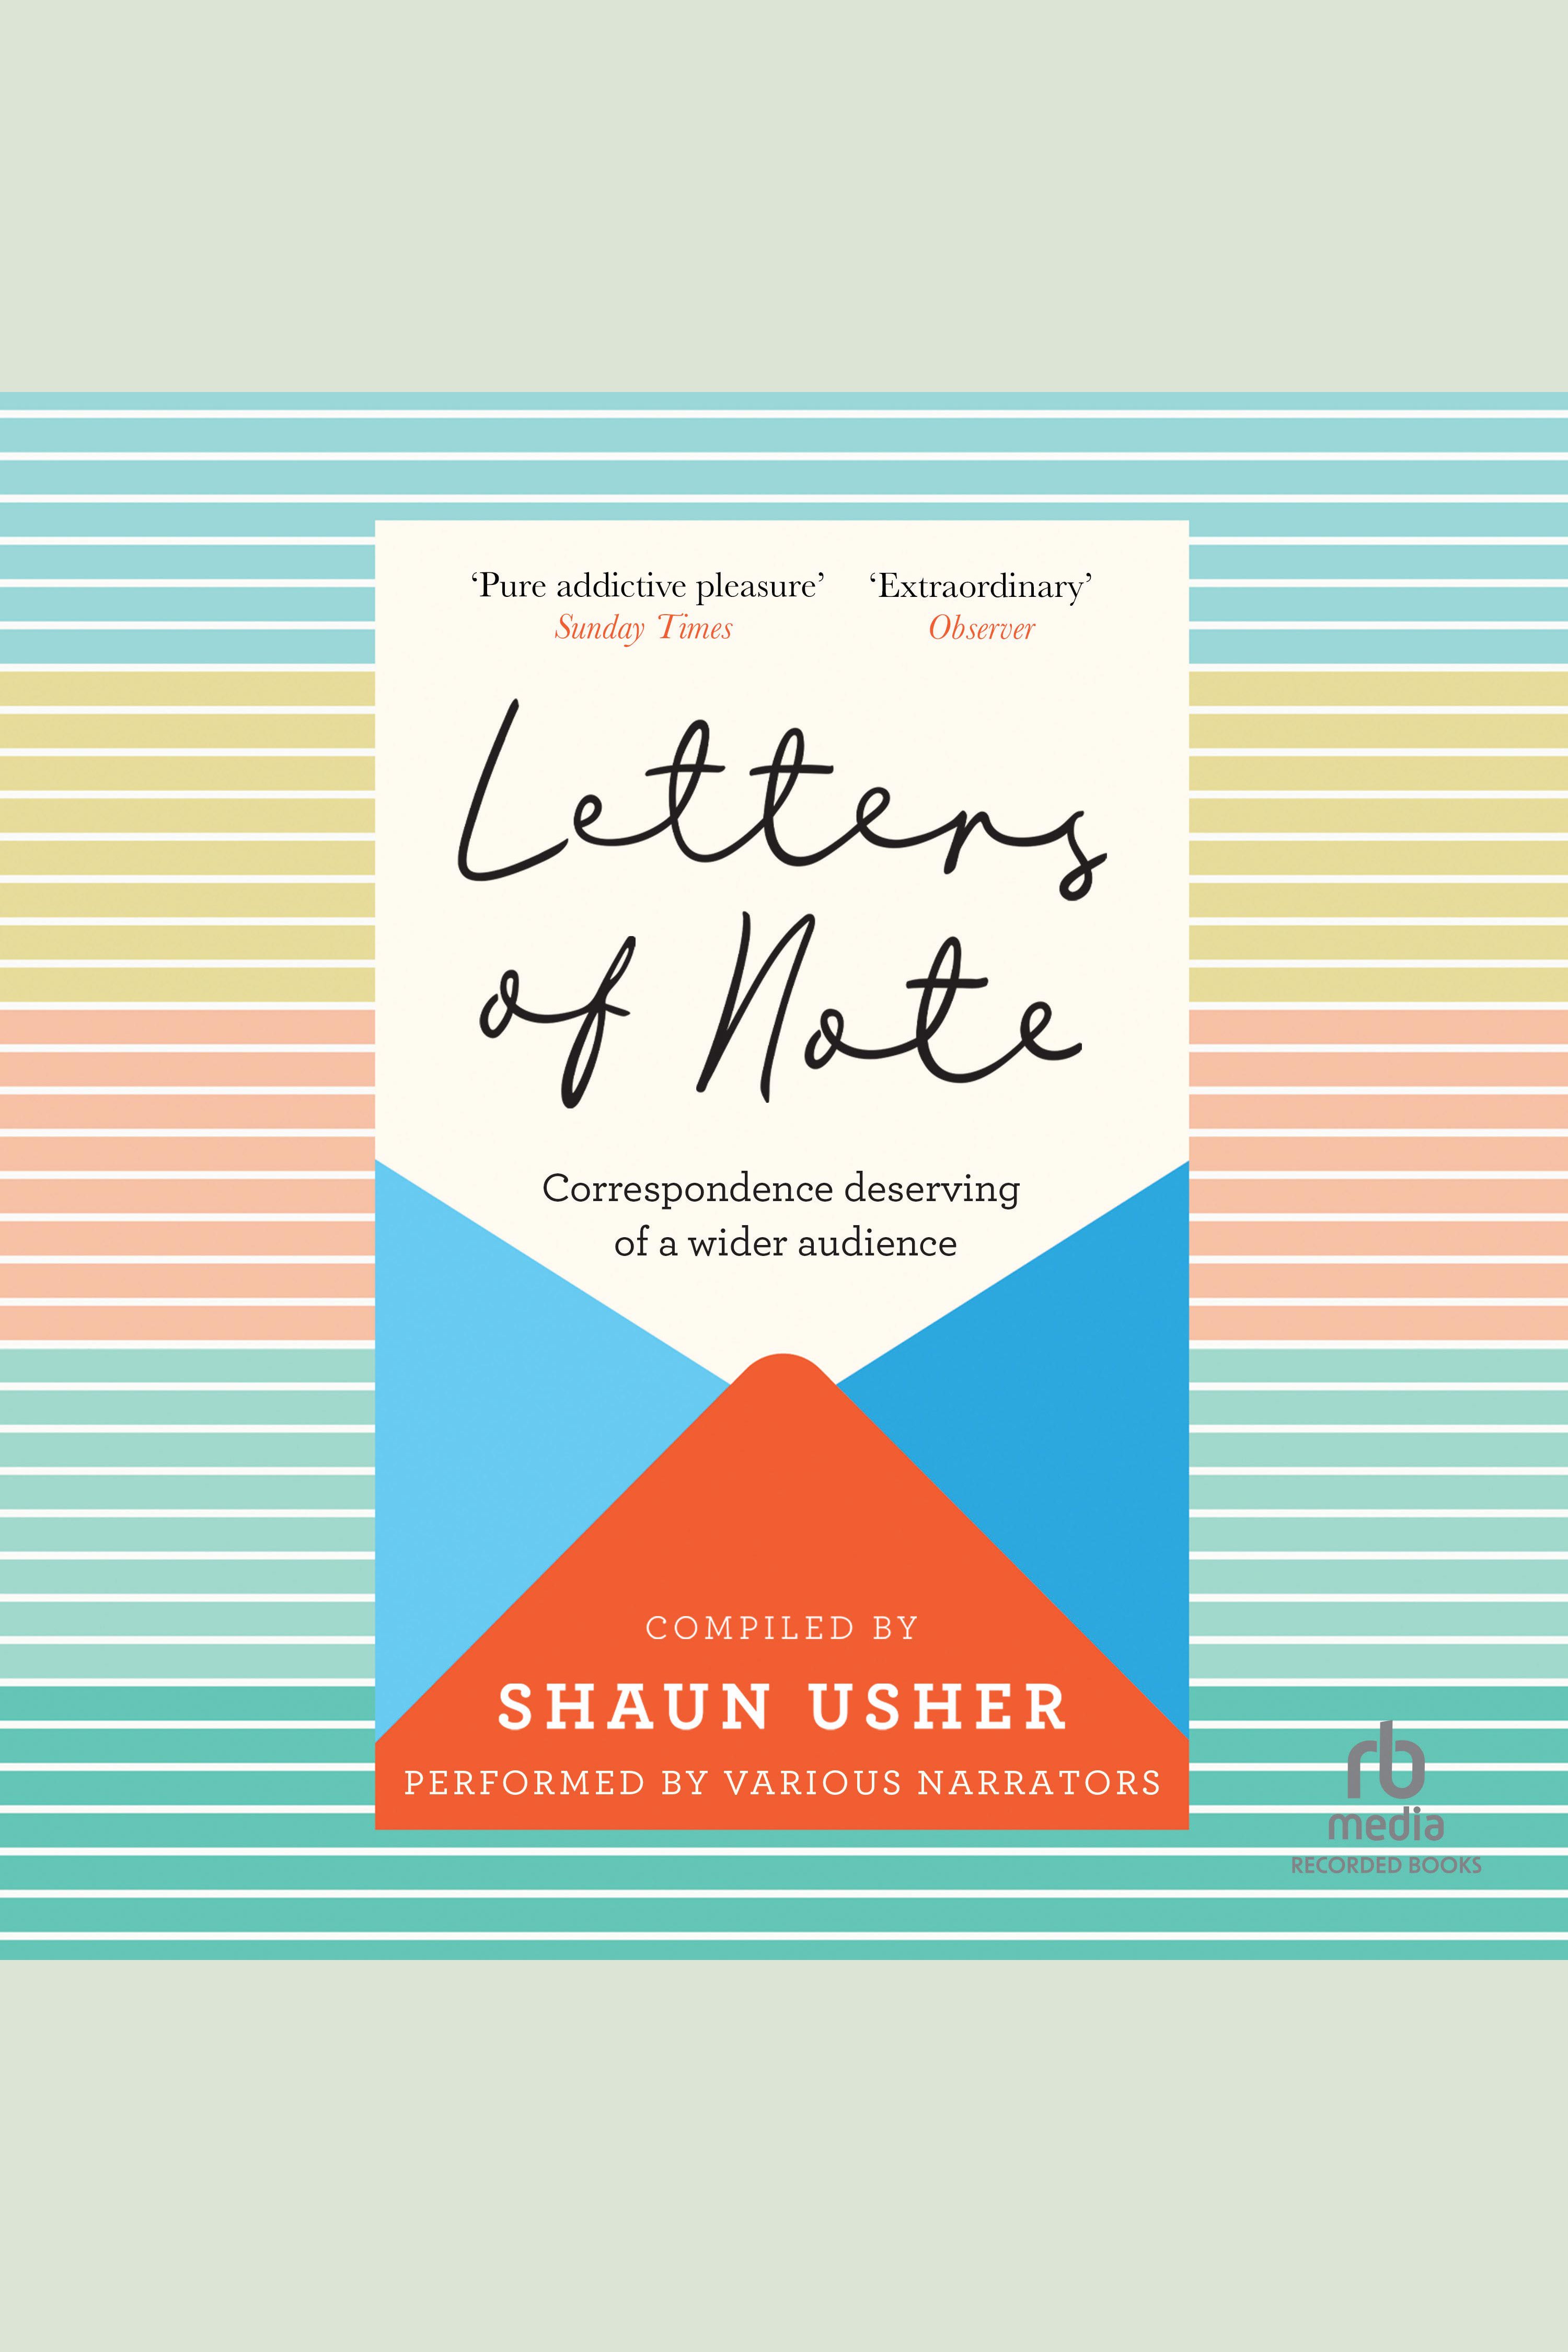 Cover Image of Letters of Note